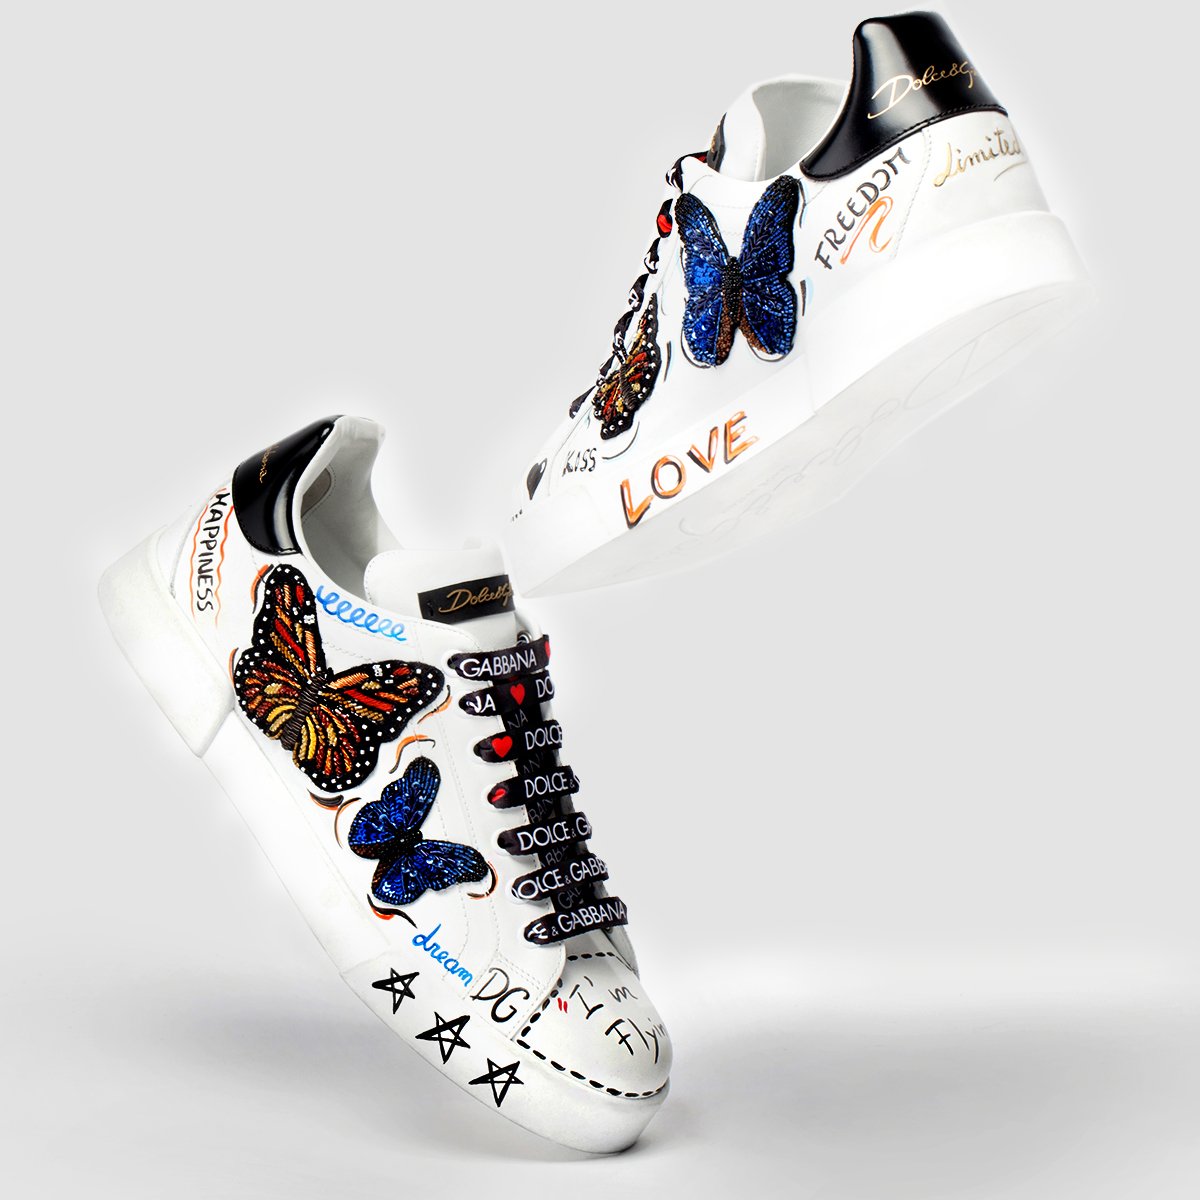 dolce & gabbana shoes limited edition